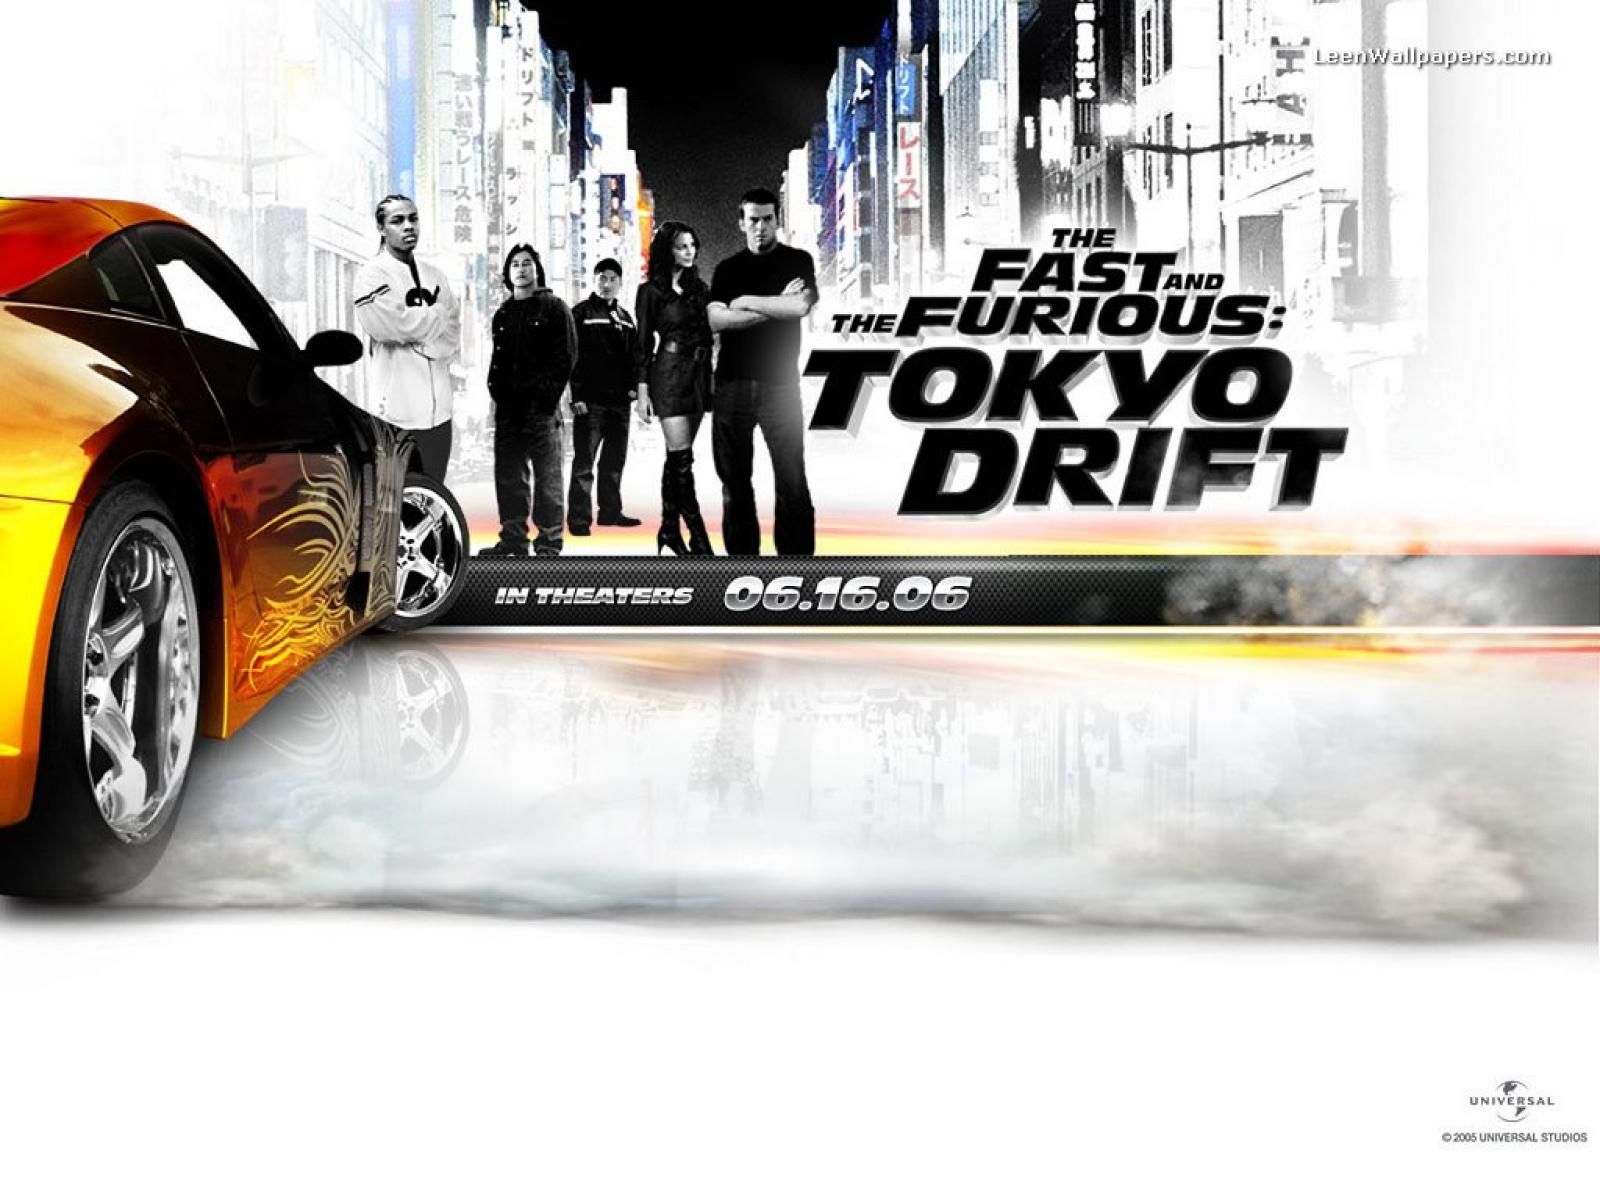 The Fast And The Furious: Tokyo Drift Wallpaper and Background Imagex1200